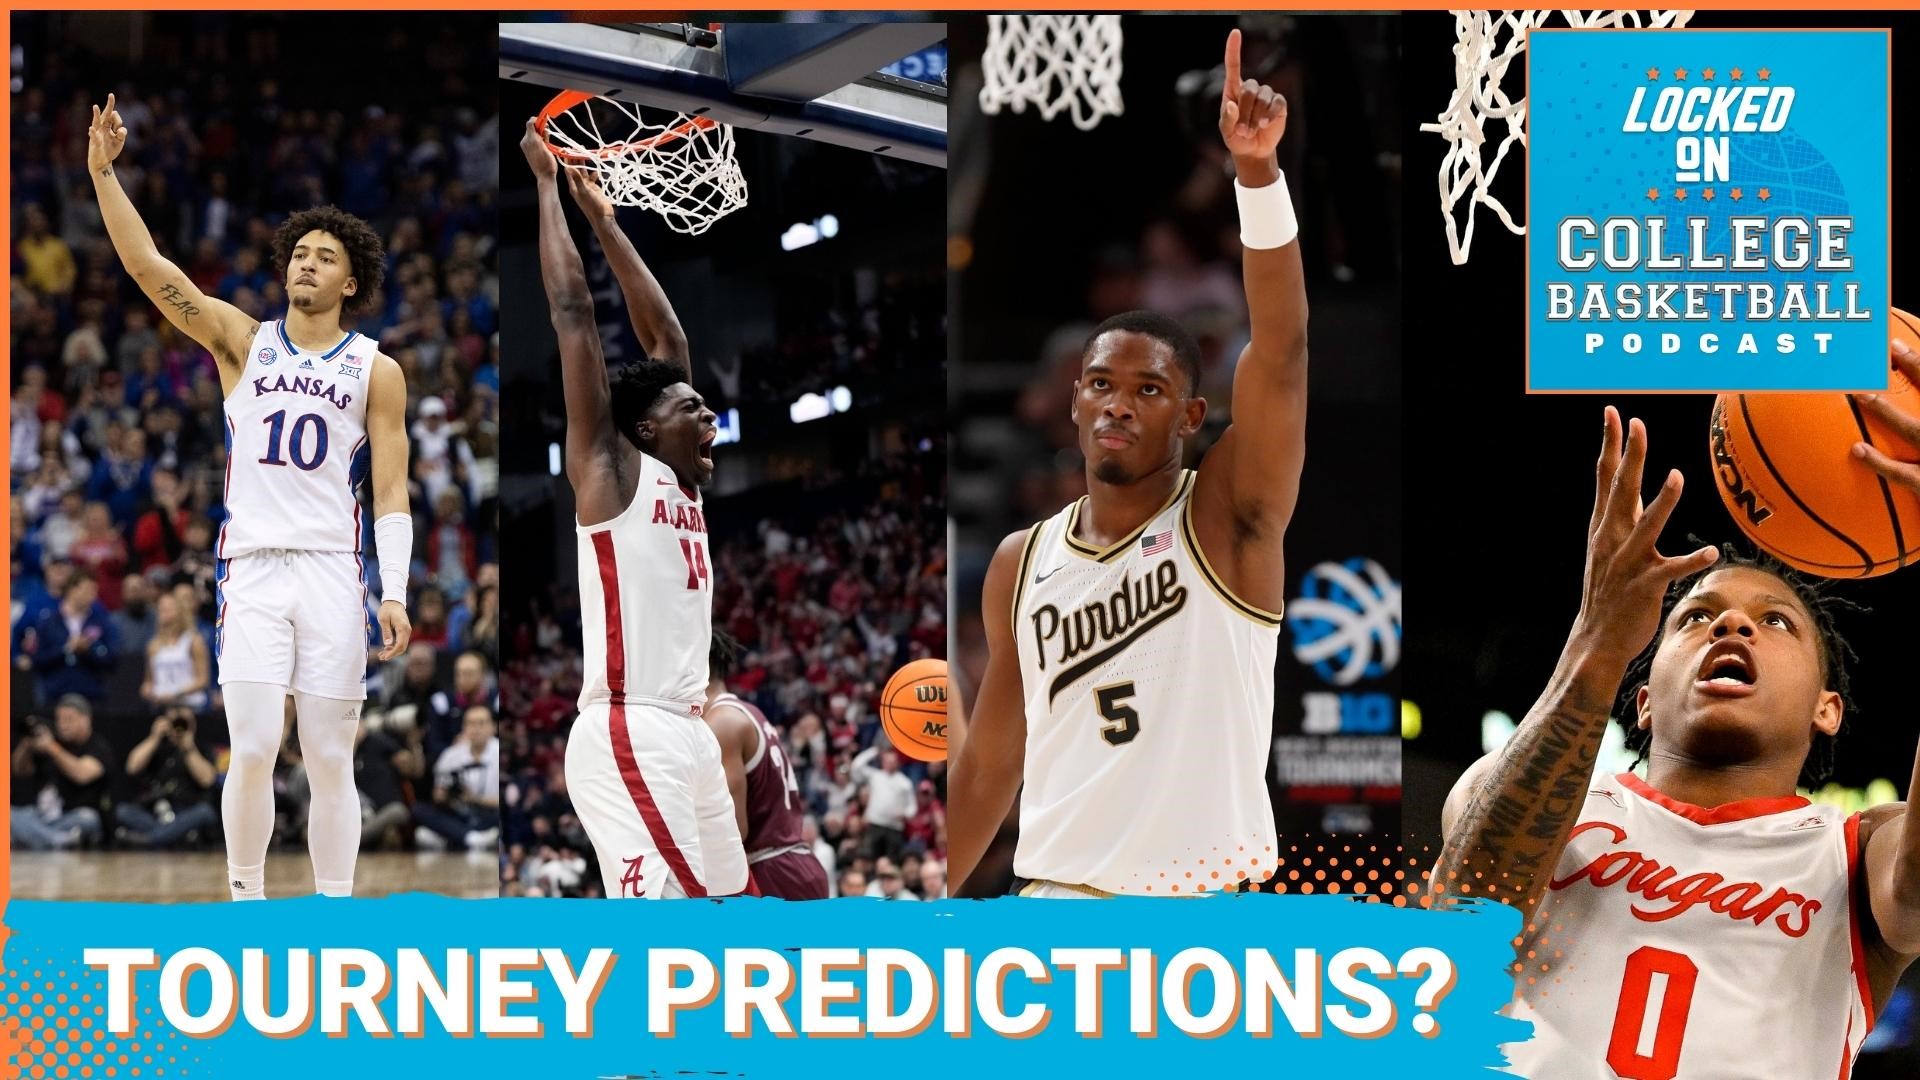 Andy and Isaac make their gut reaction Elite 8 and Final 4 predictions, both agreeing in a surprise run by Miami and an early exit from Purdue.